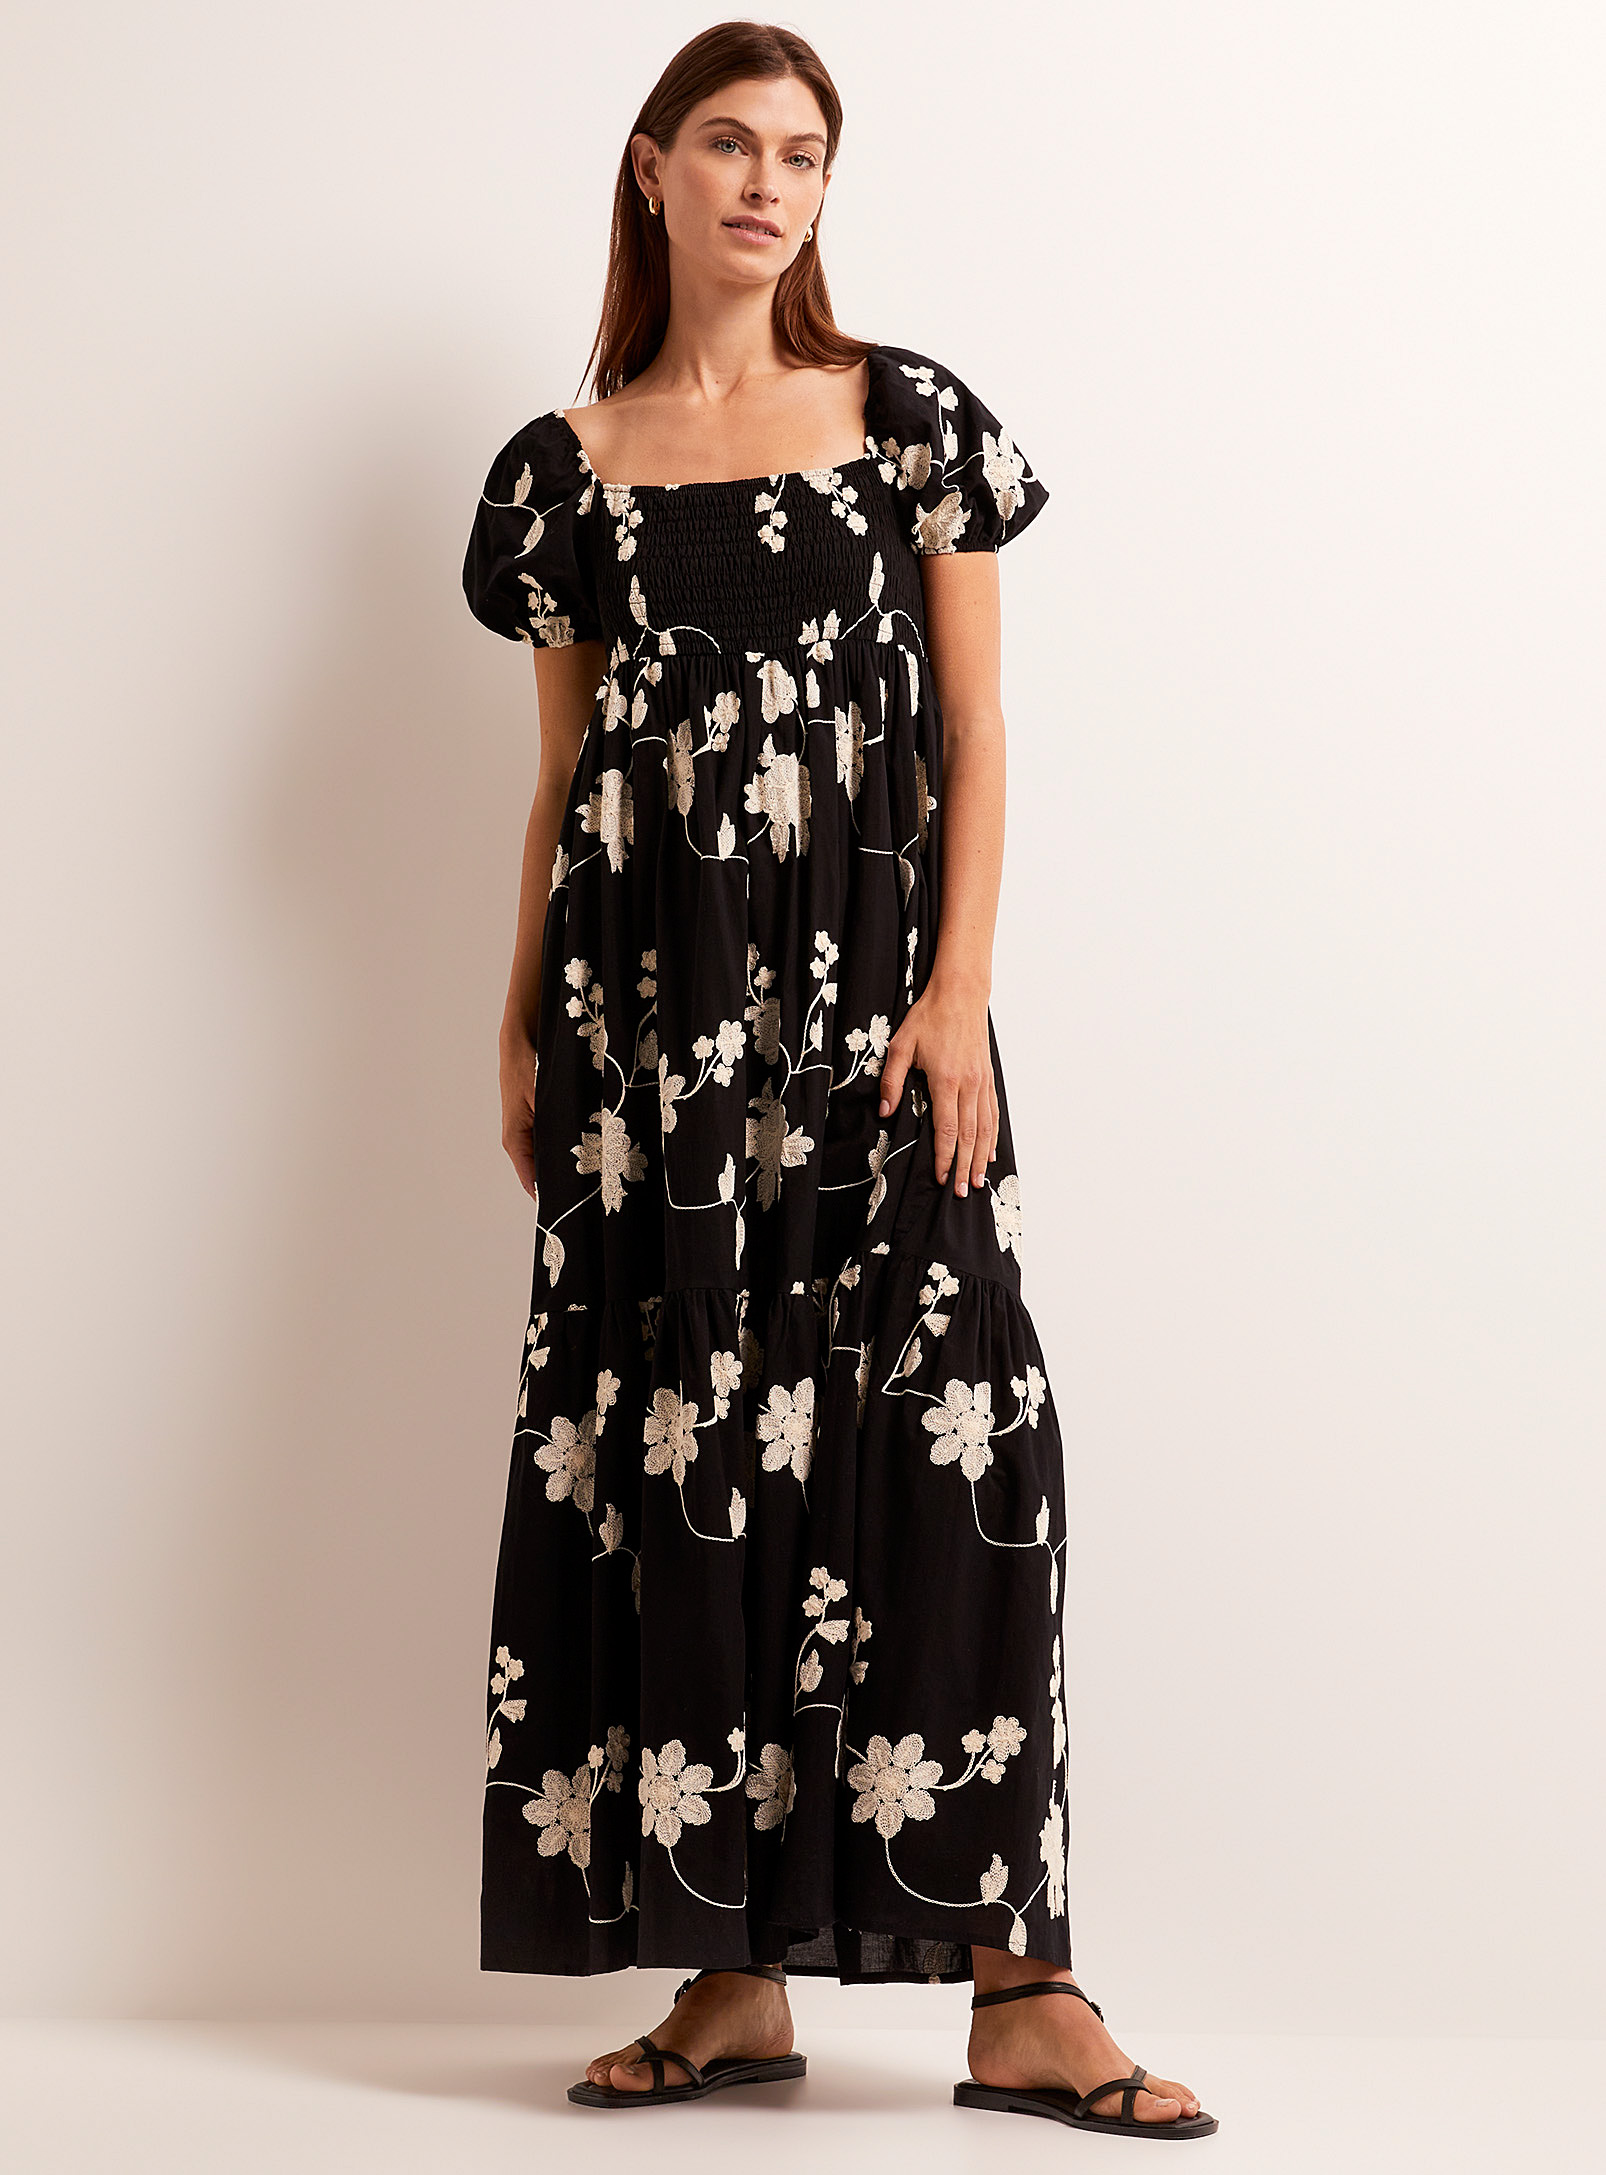 Contemporaine - Women's Embroidered flowers ruffled dress